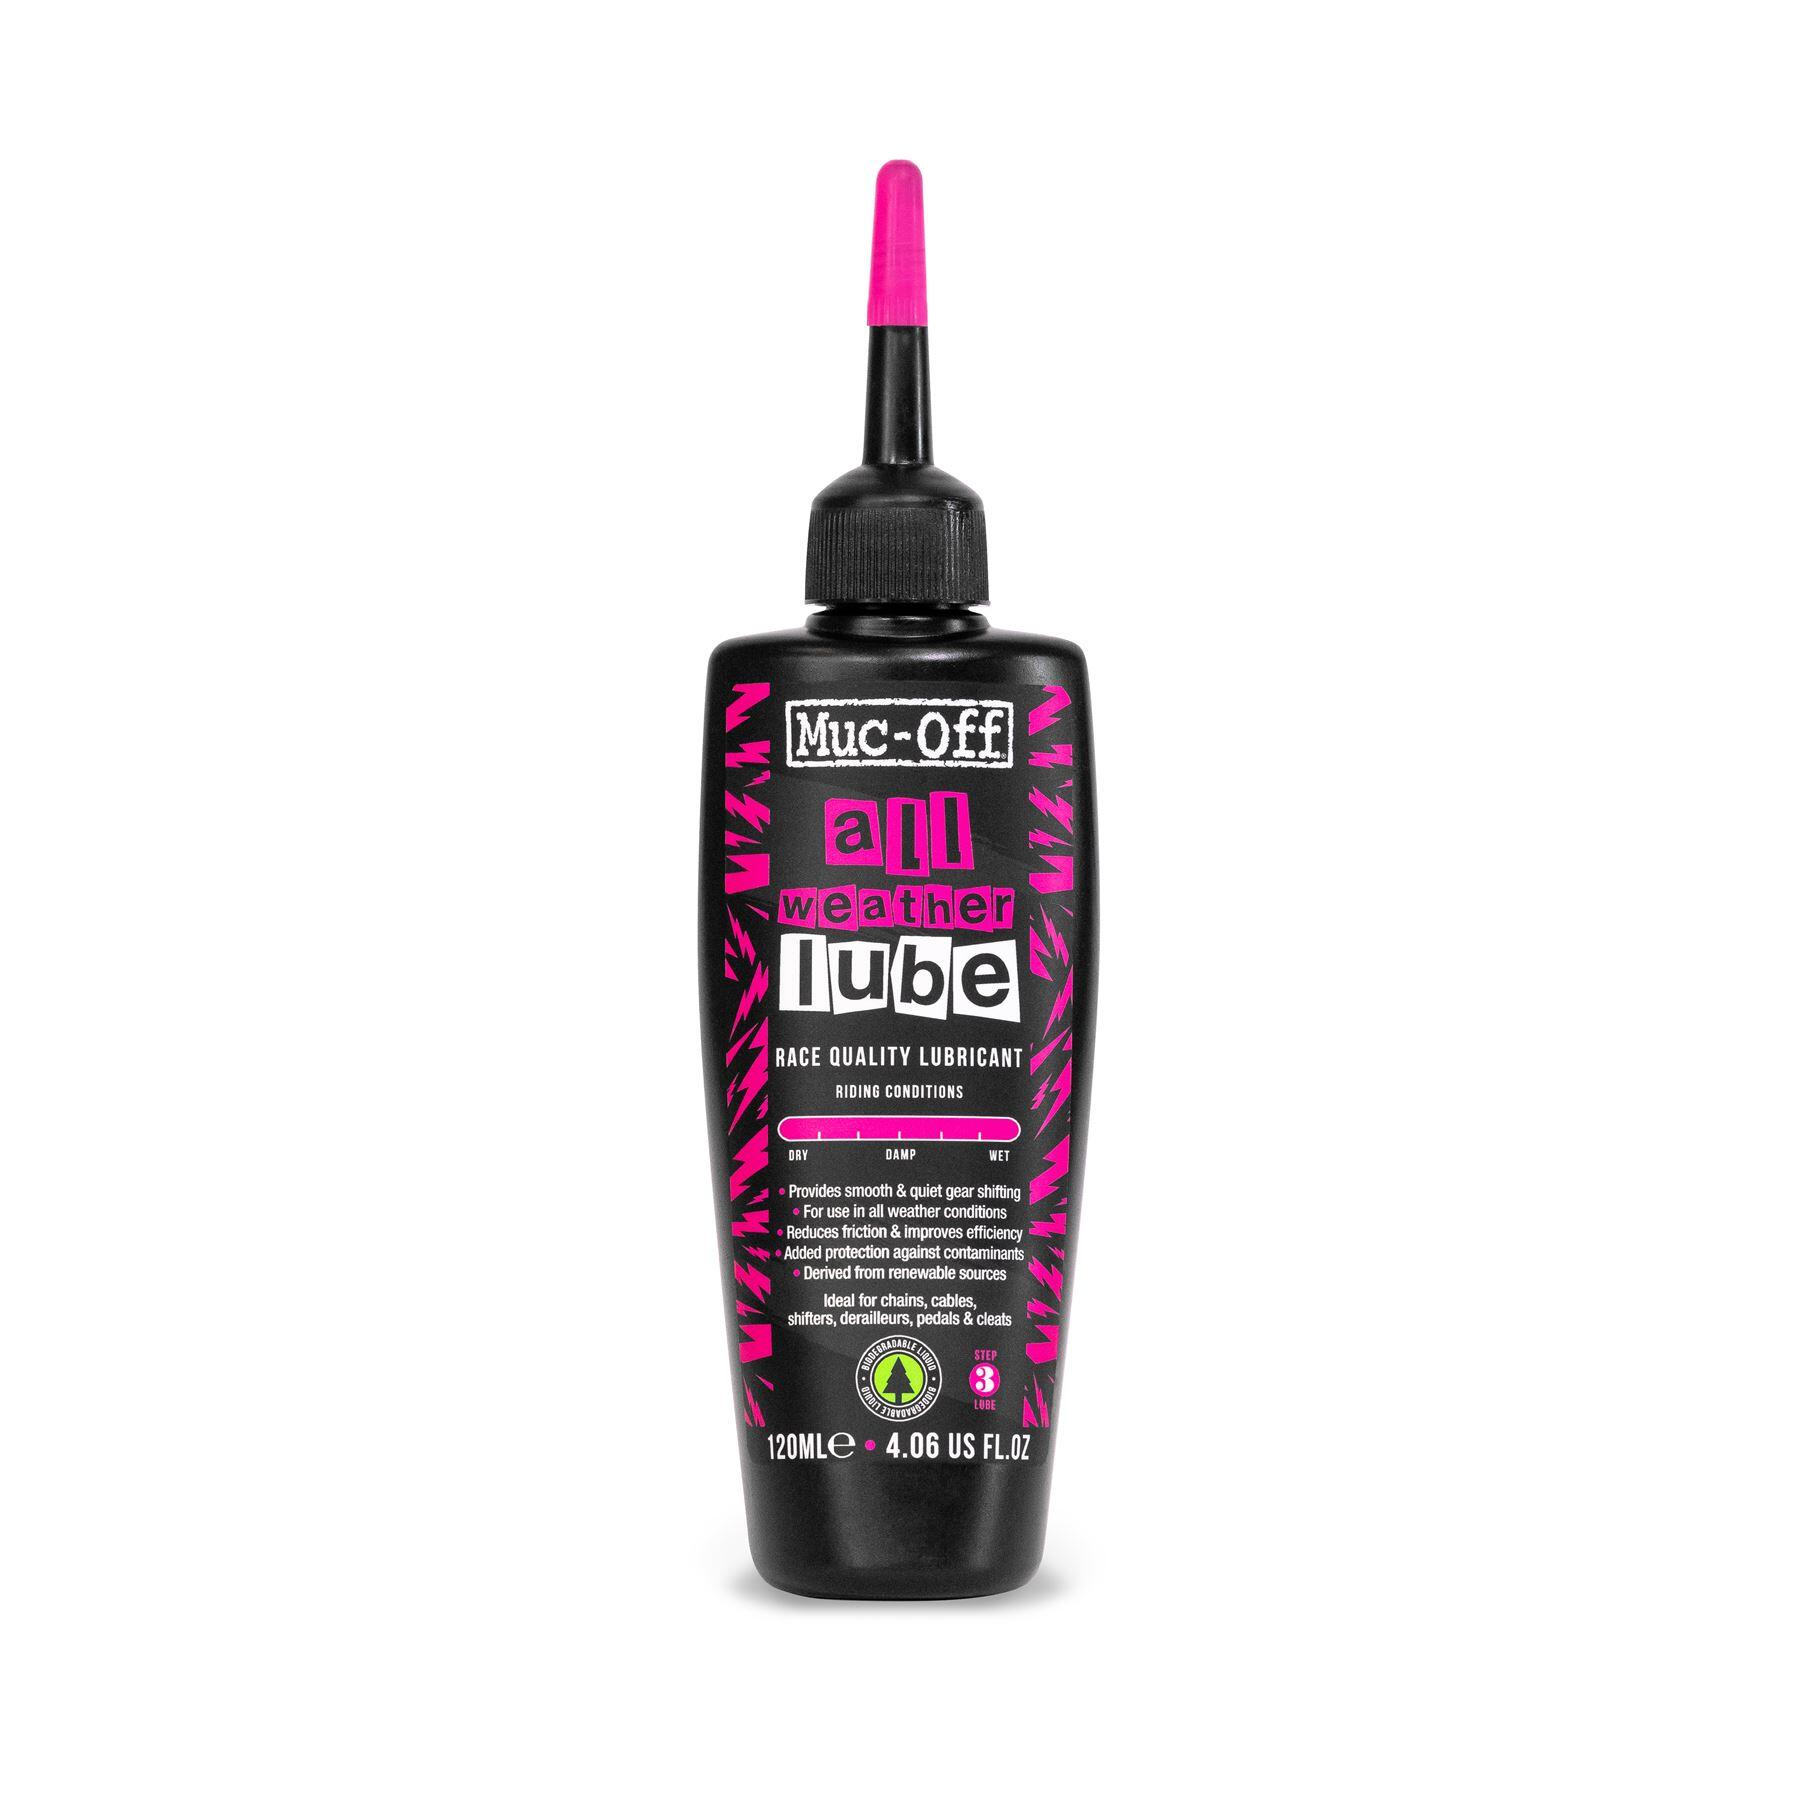 MUC-OFF Muc-Off All Weather Race Quality Lube - 120ml